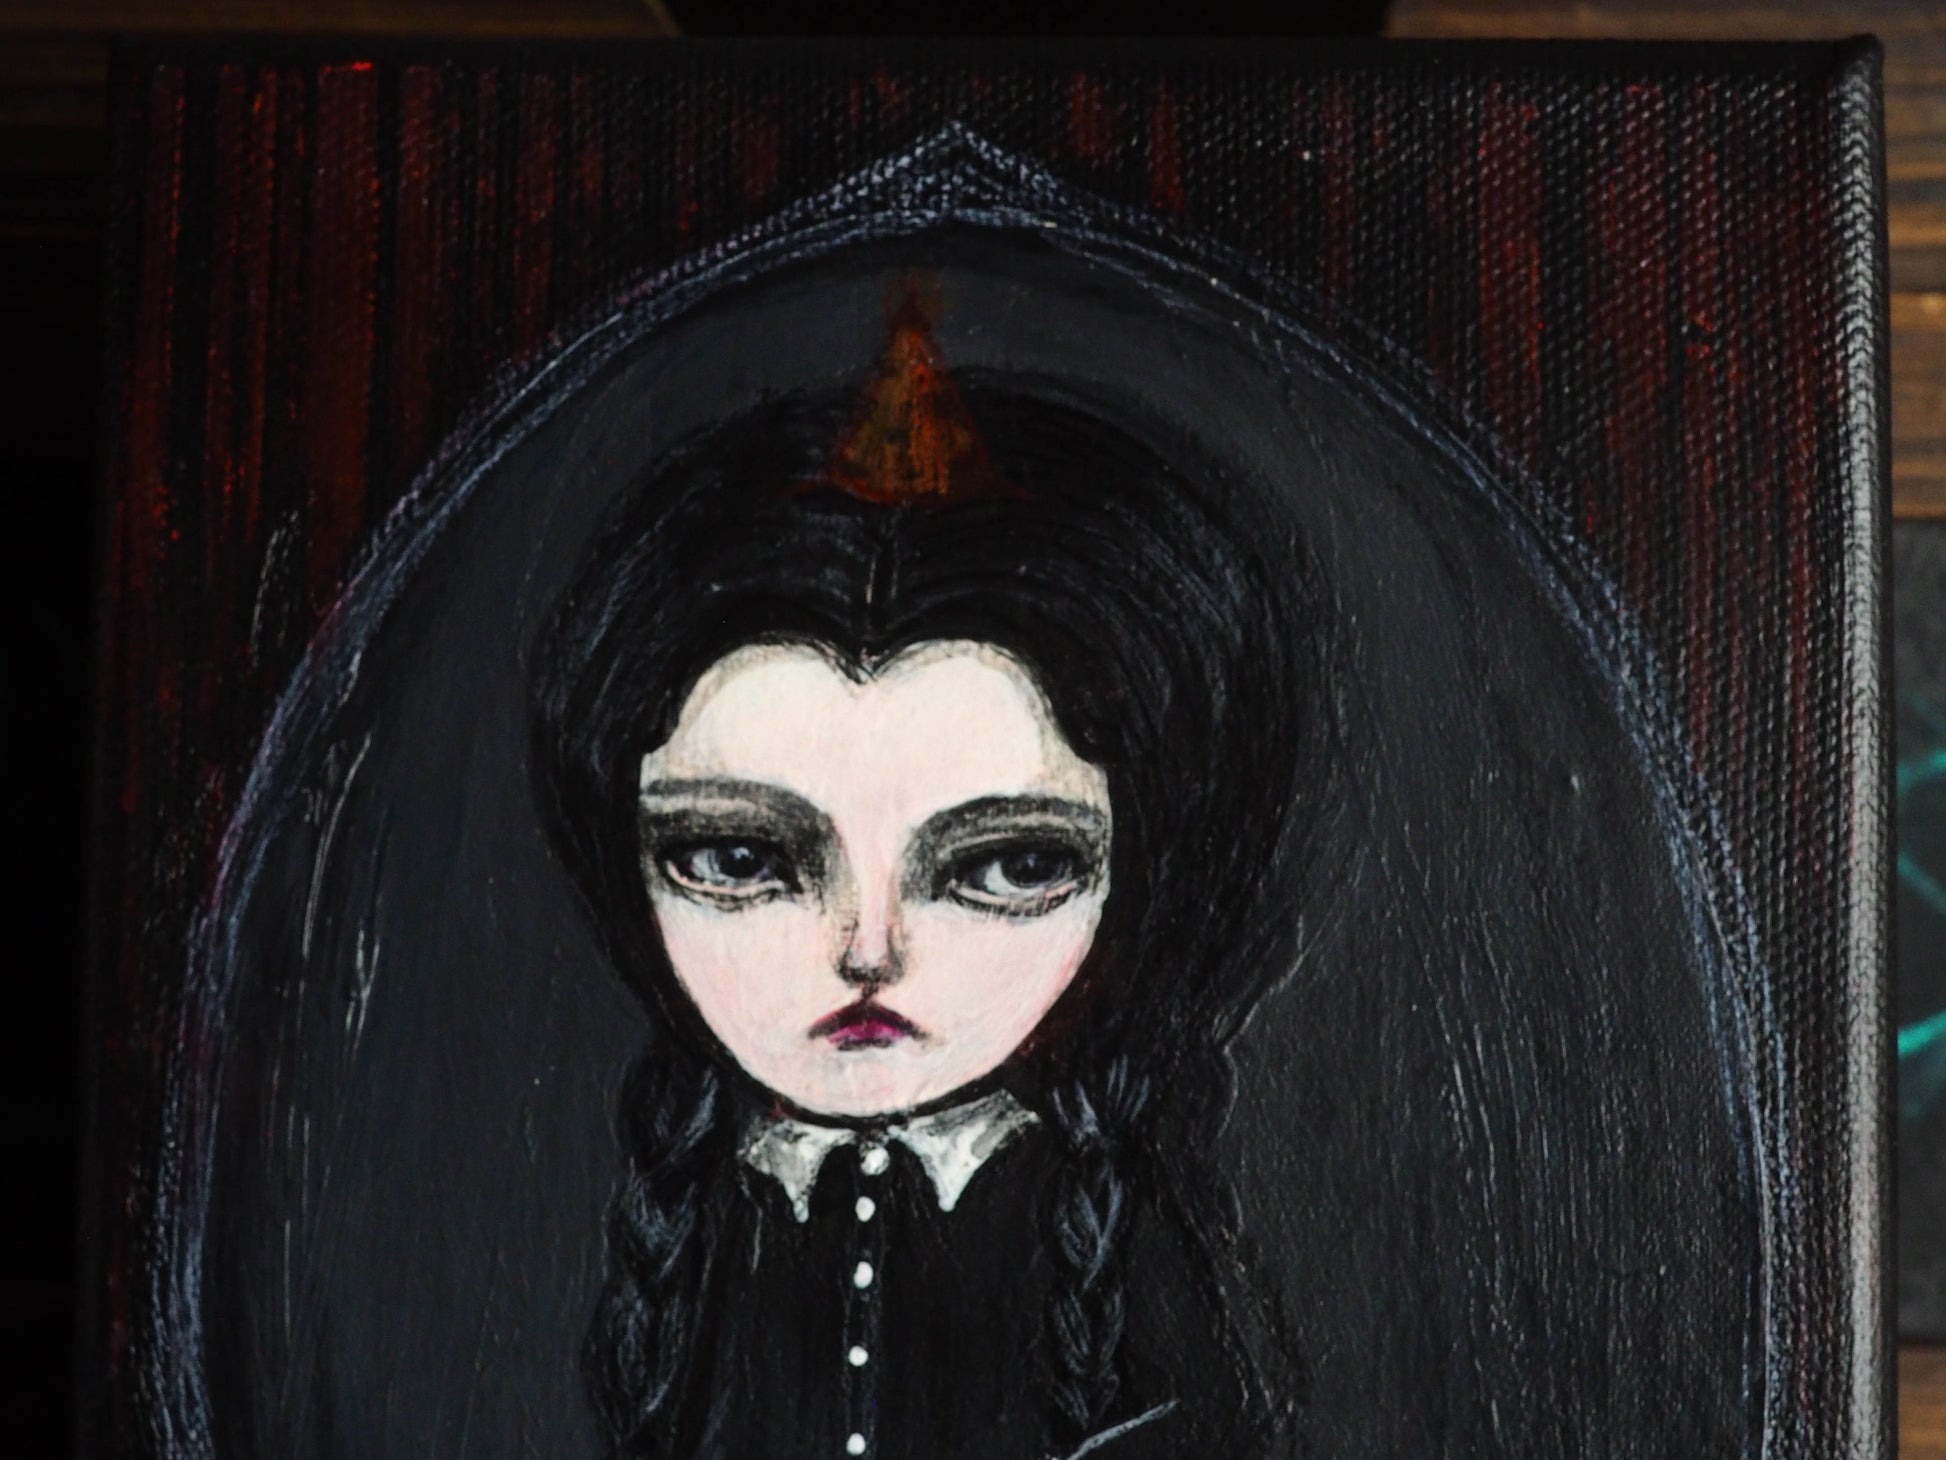 Wednesday Addams as an original mixed media Halloween art painting by Danita Art. The mysterious TV Character from the Addams Family is now a whimsical fan art illustration by Danita.